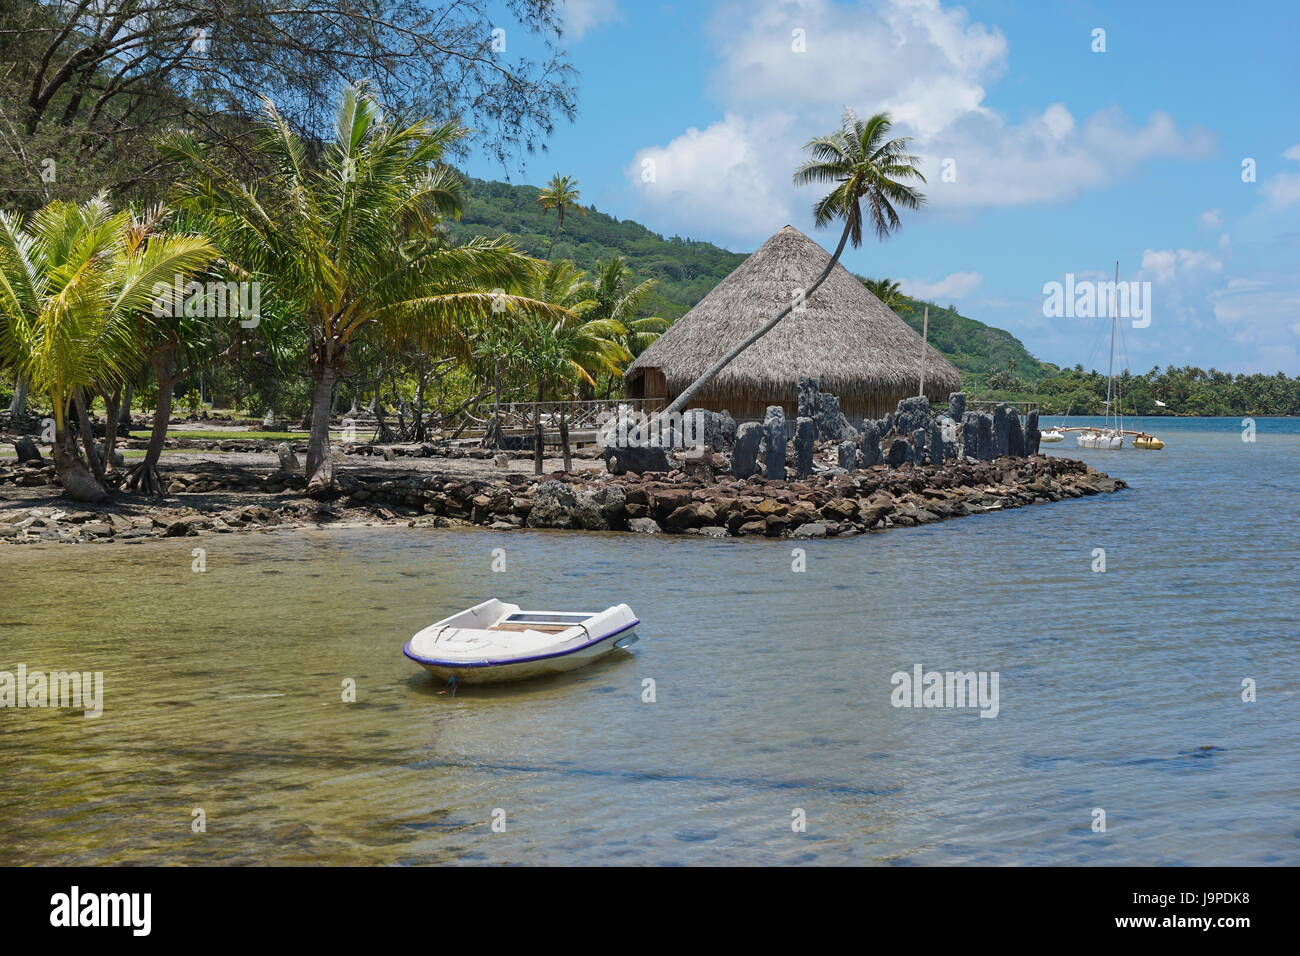 Coastal landscape on the shore of the saltwater lake Fauna Nui with a marae and a traditional hut, Huahine island in French Polynesia, south Pacific Stock Photo